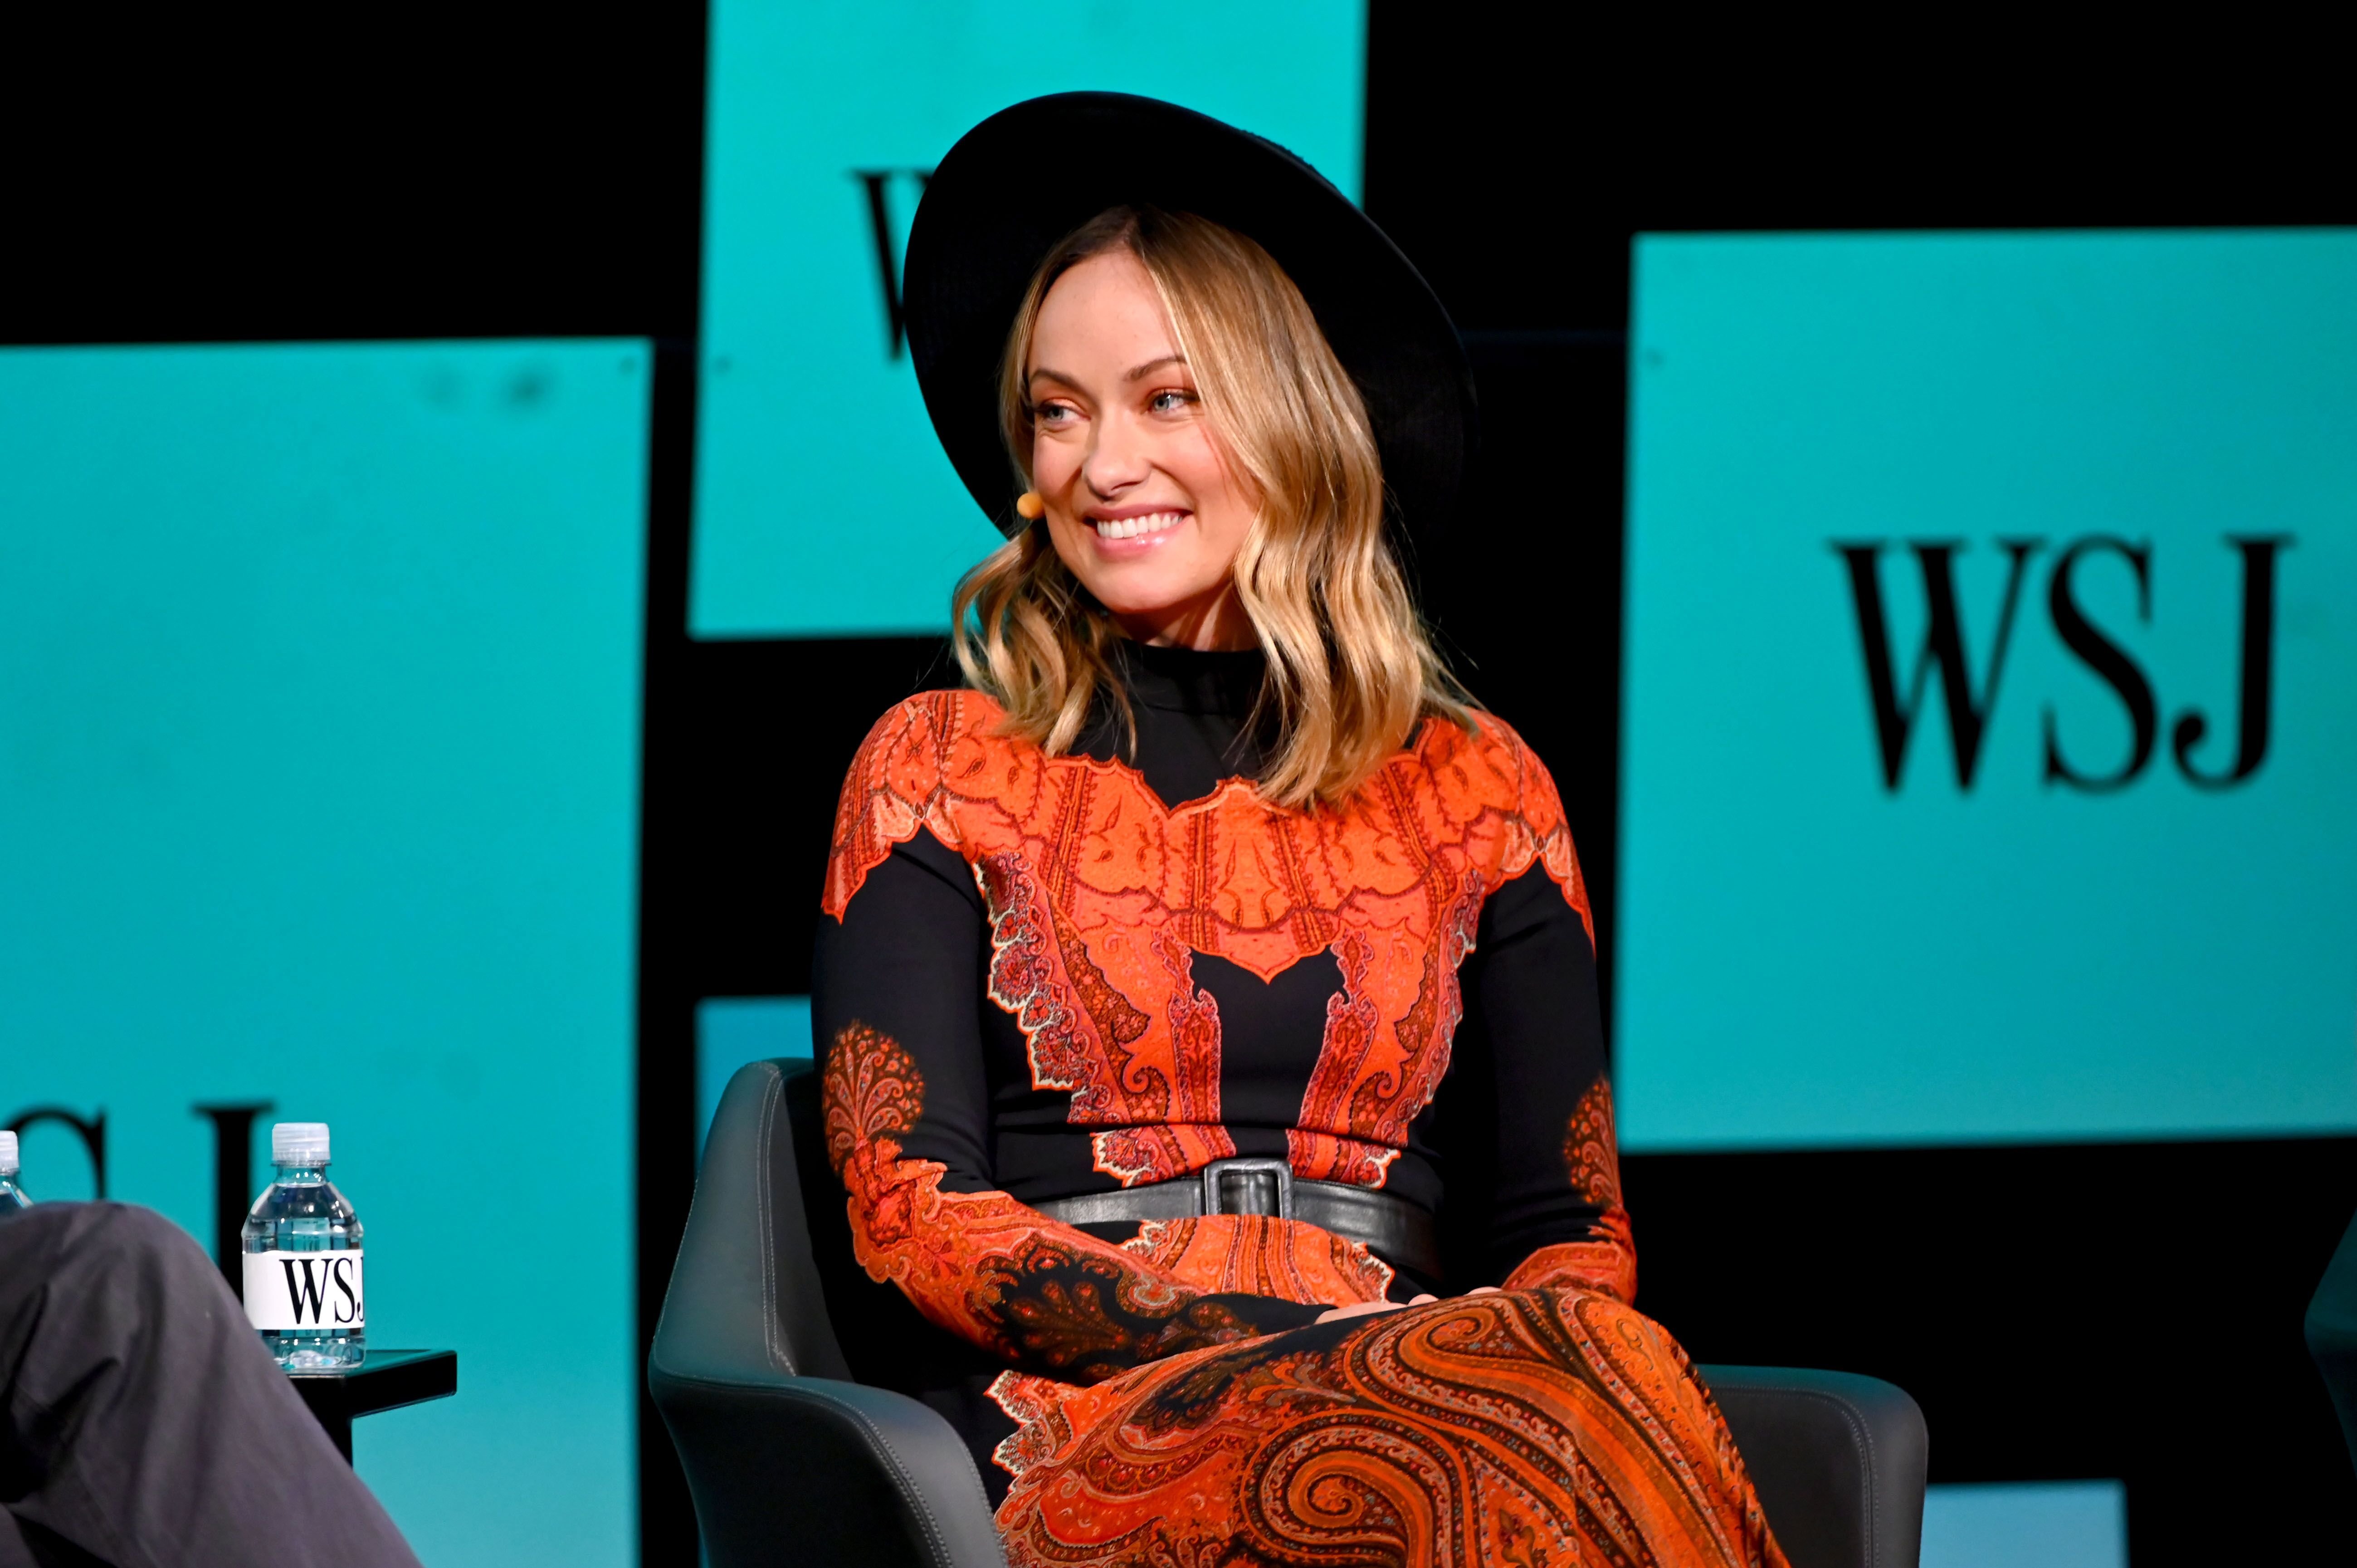 Olivia Wilde at The Wall Street Journal's "The Future of Everything Festival" held at Spring Studios on May 22, 2019, in New York City | Photo: Nicholas Hunt/Getty Images